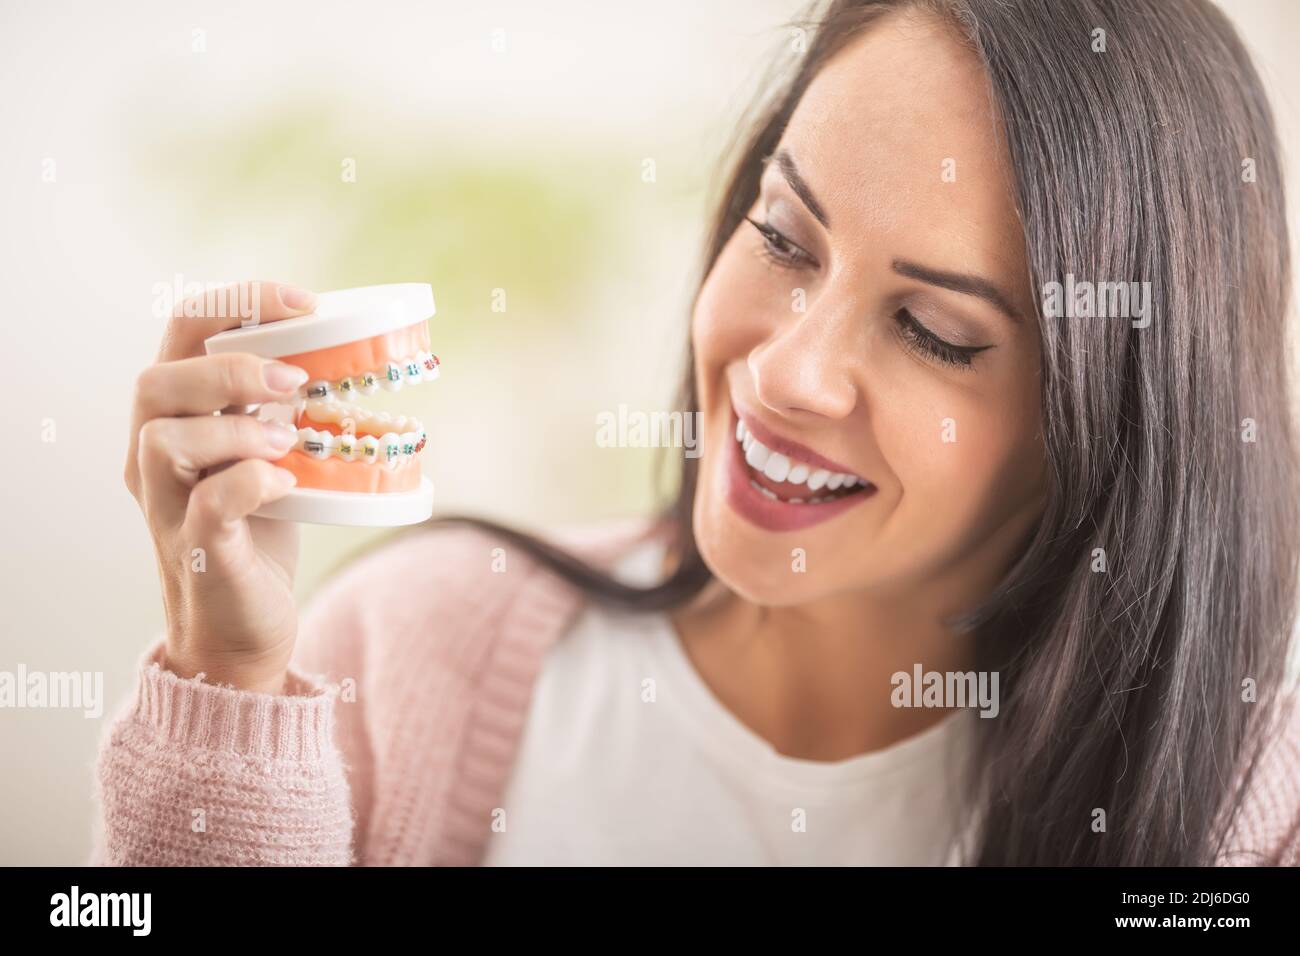 Smiling female looks at the colorful braces on teeth prothesis in her hand. Stock Photo